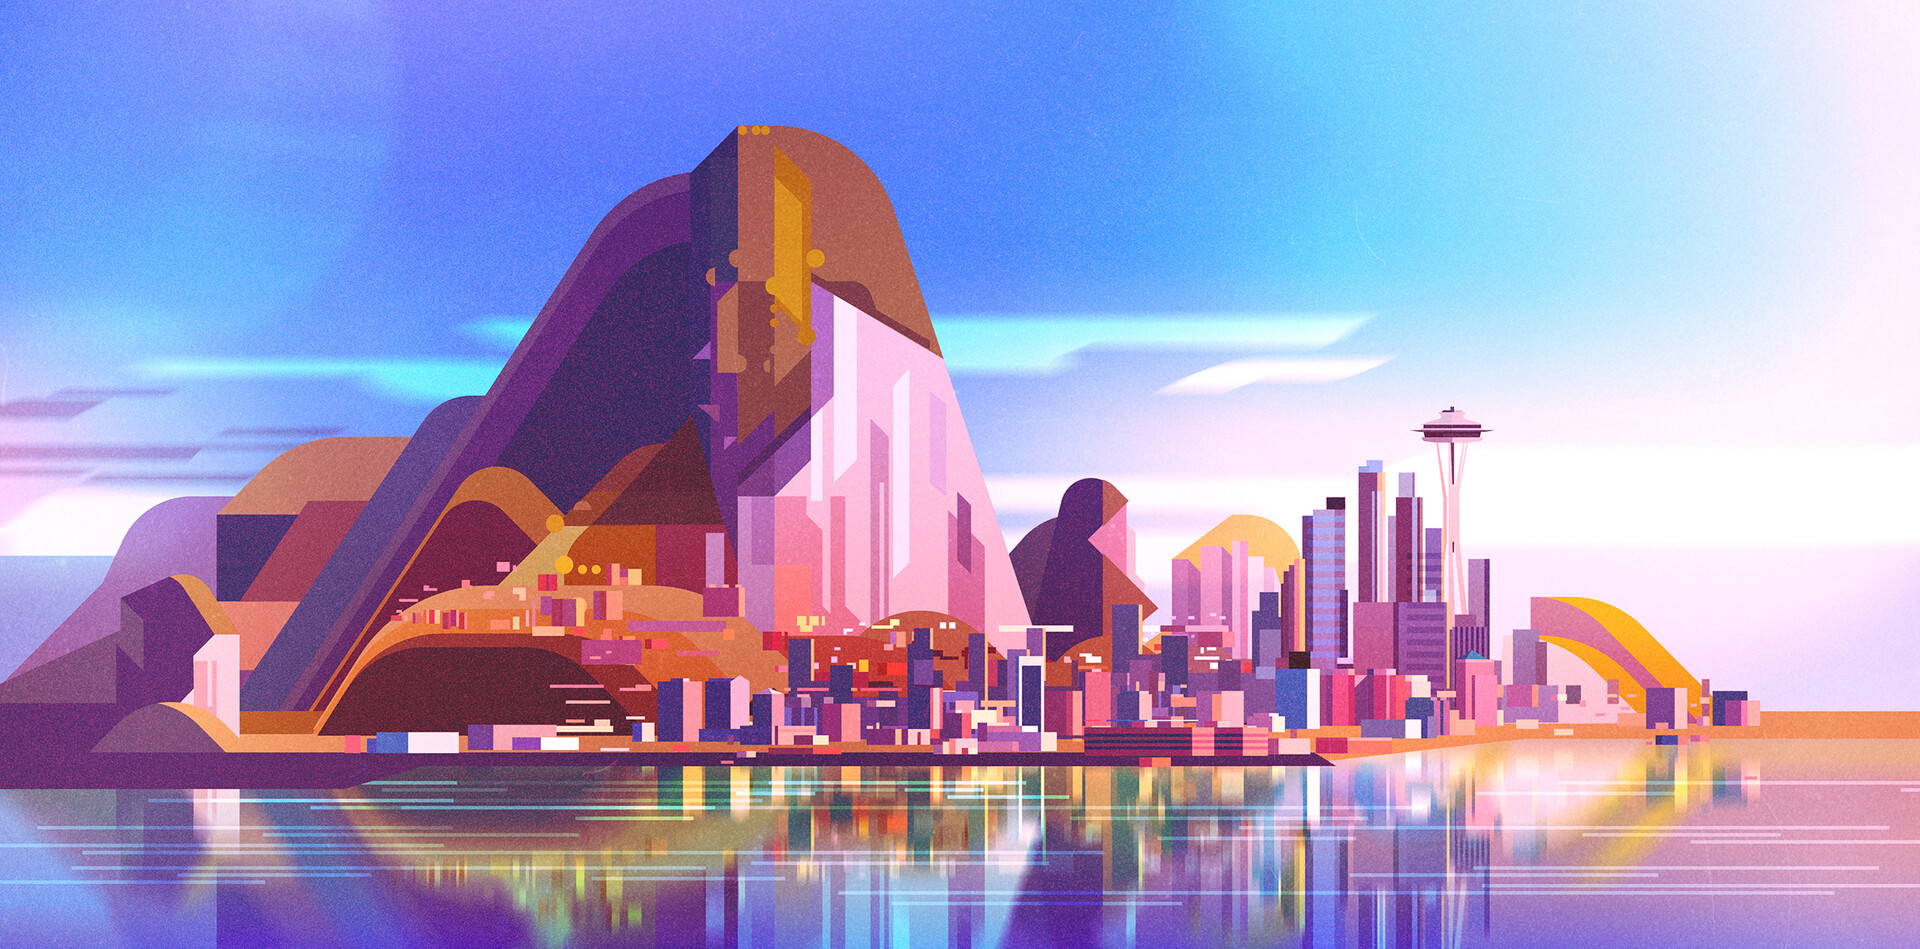 Pink Mountains Water Reflection Sky City Building Skyscraper James Gilleard 1920x949